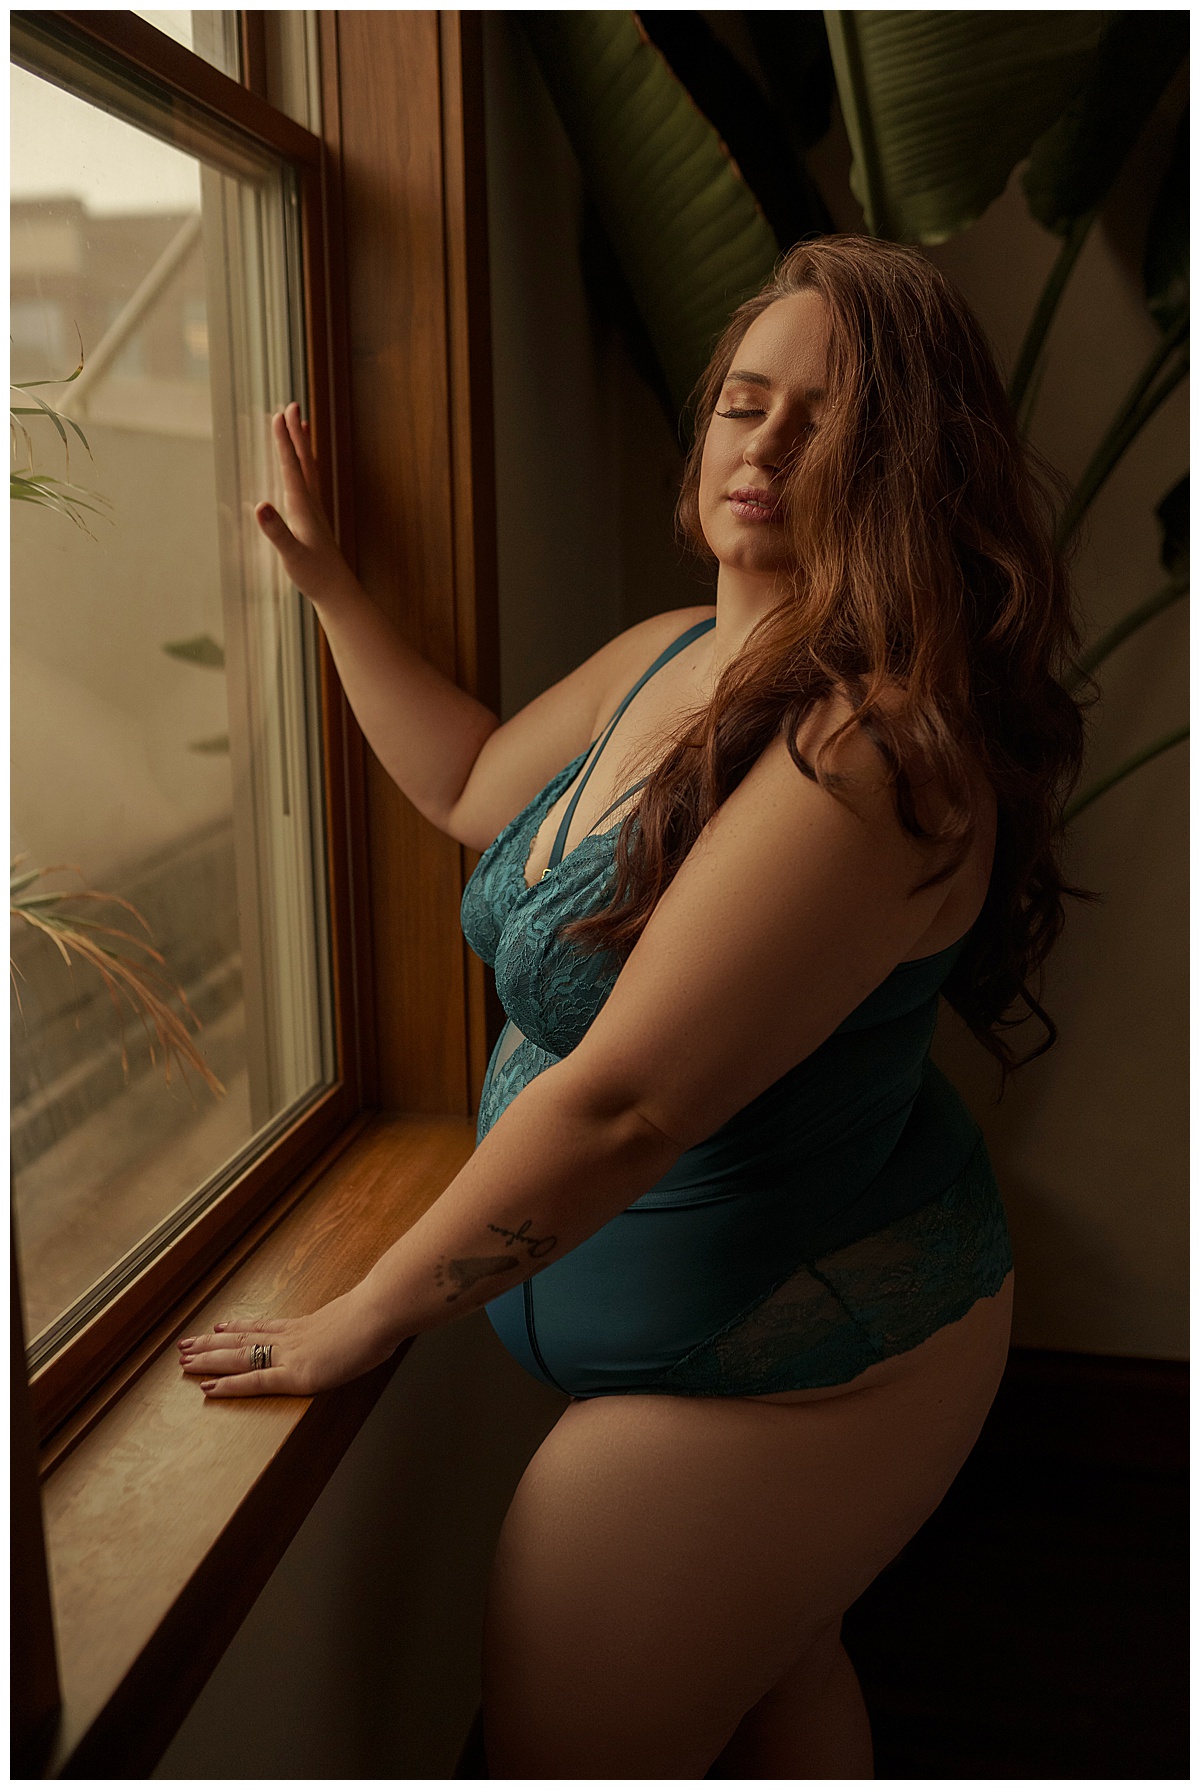 Woman steps out of her Comfort Zone and stands in front of a window wearing lingerie